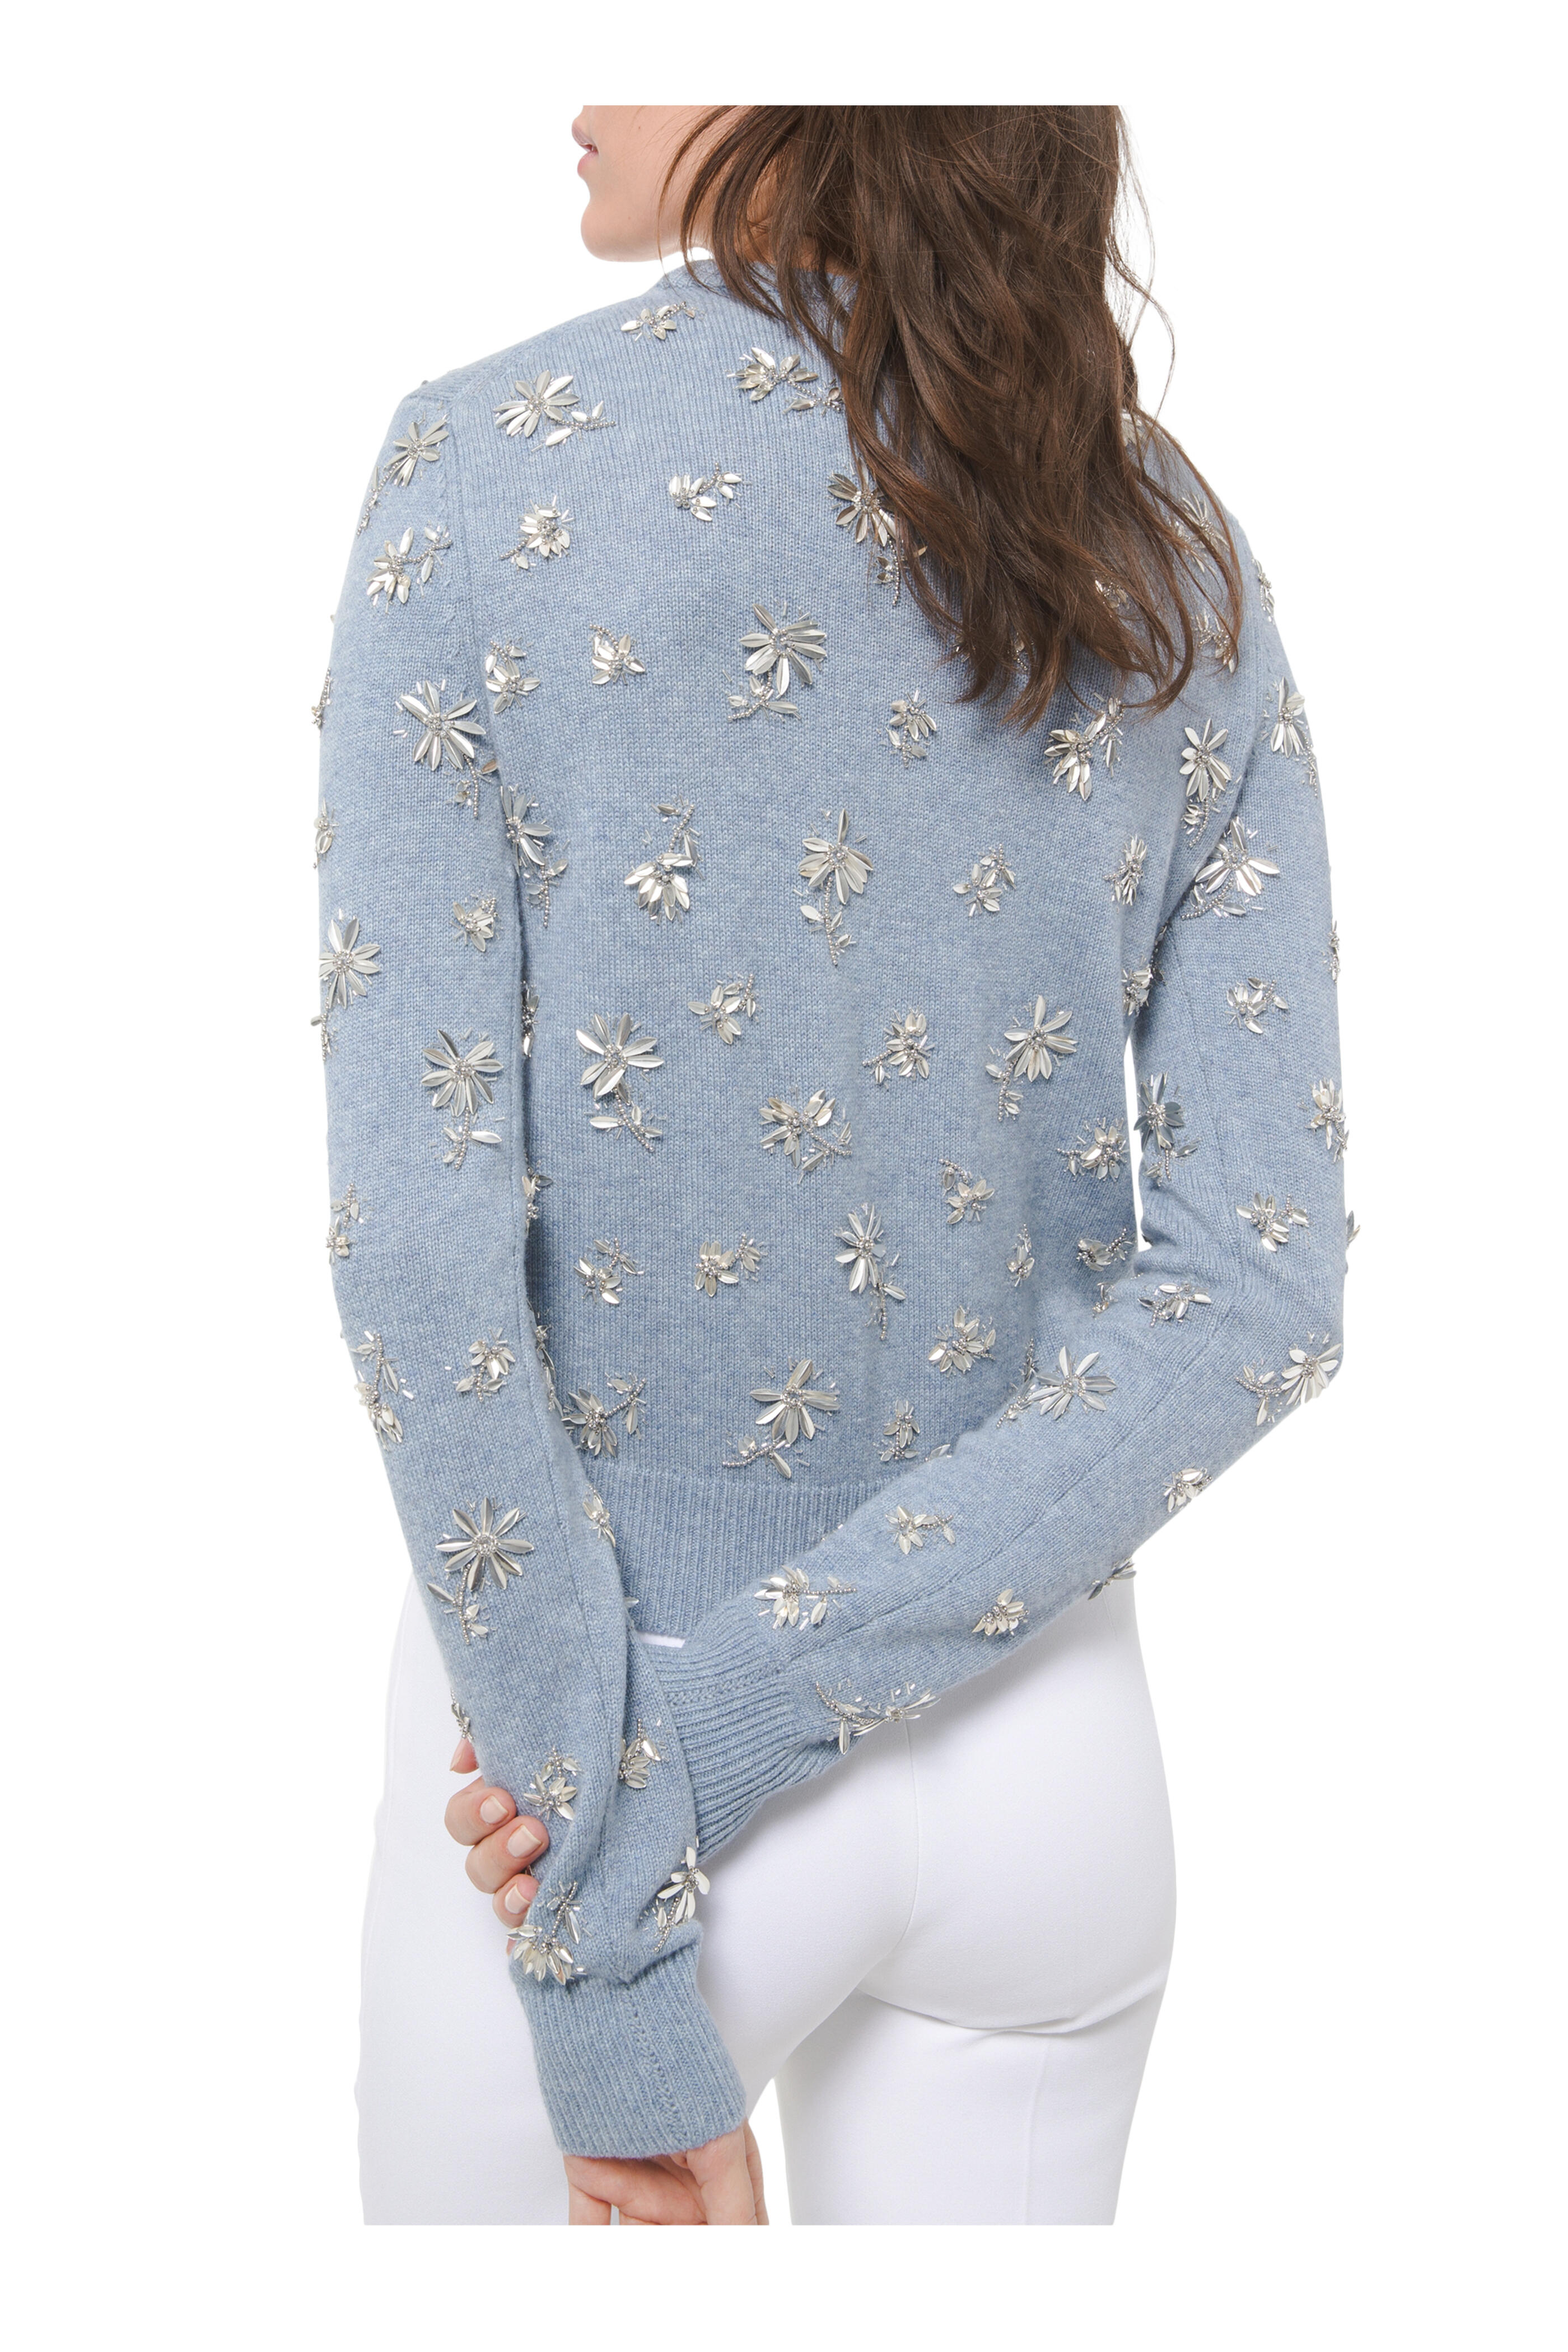 absceso Hacia aeropuerto Michael Kors Collection - Stream Melange Cashmere Floral Embellished Sweater